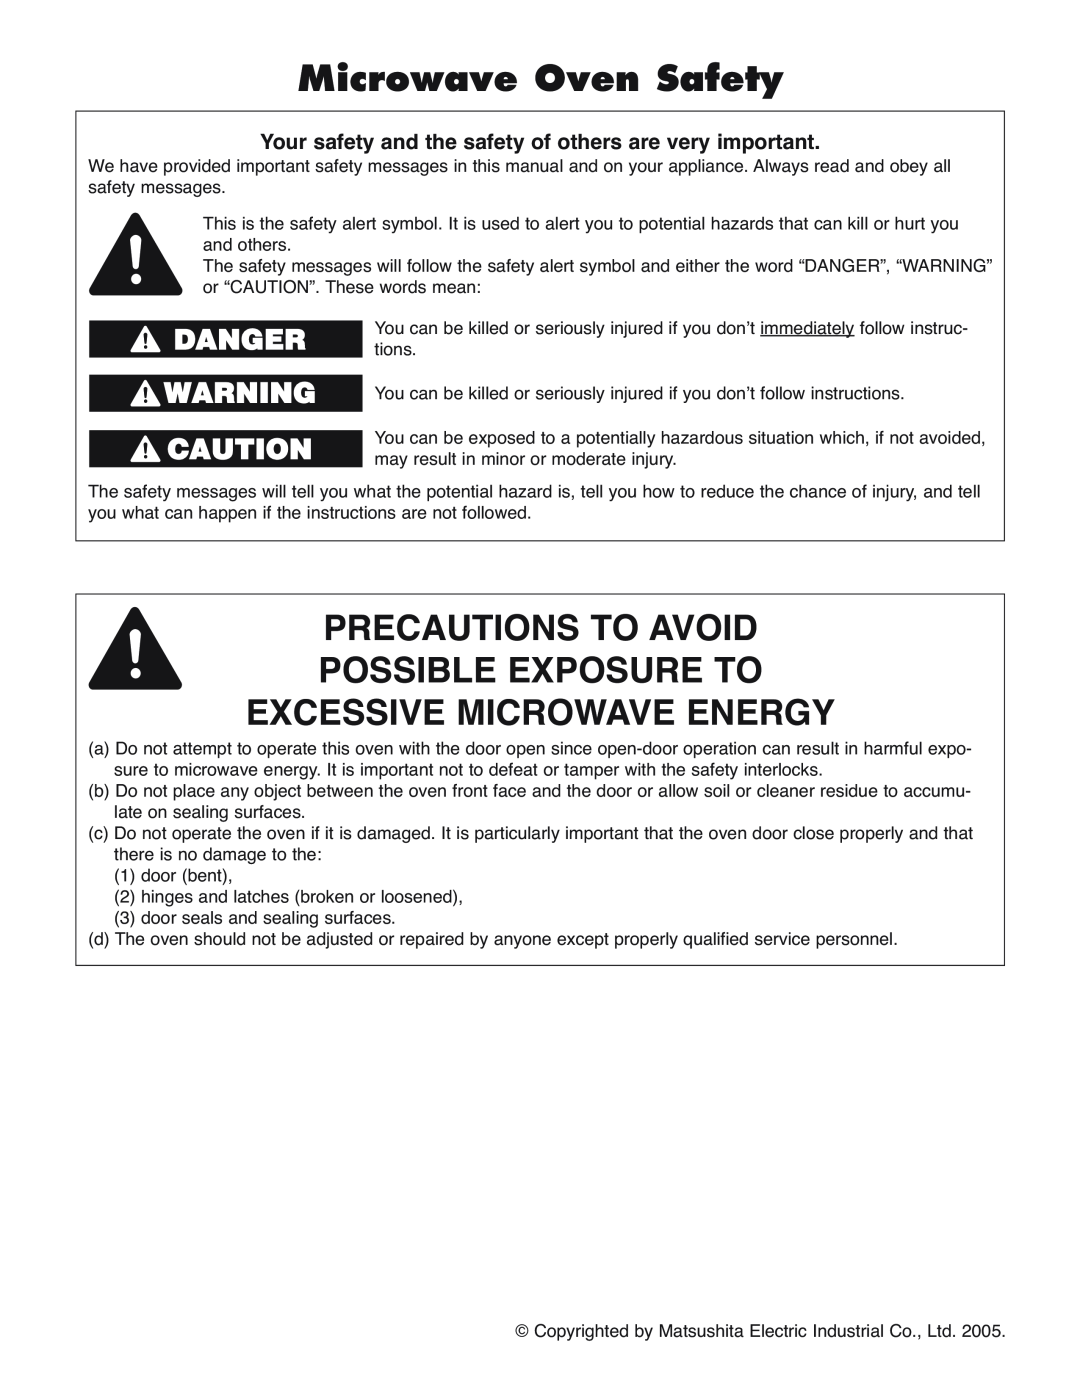 Panasonic NN-H275 Microwave Oven Safety, Precautions To Avoid Possible Exposure To Excessive Microwave Energy, Danger 